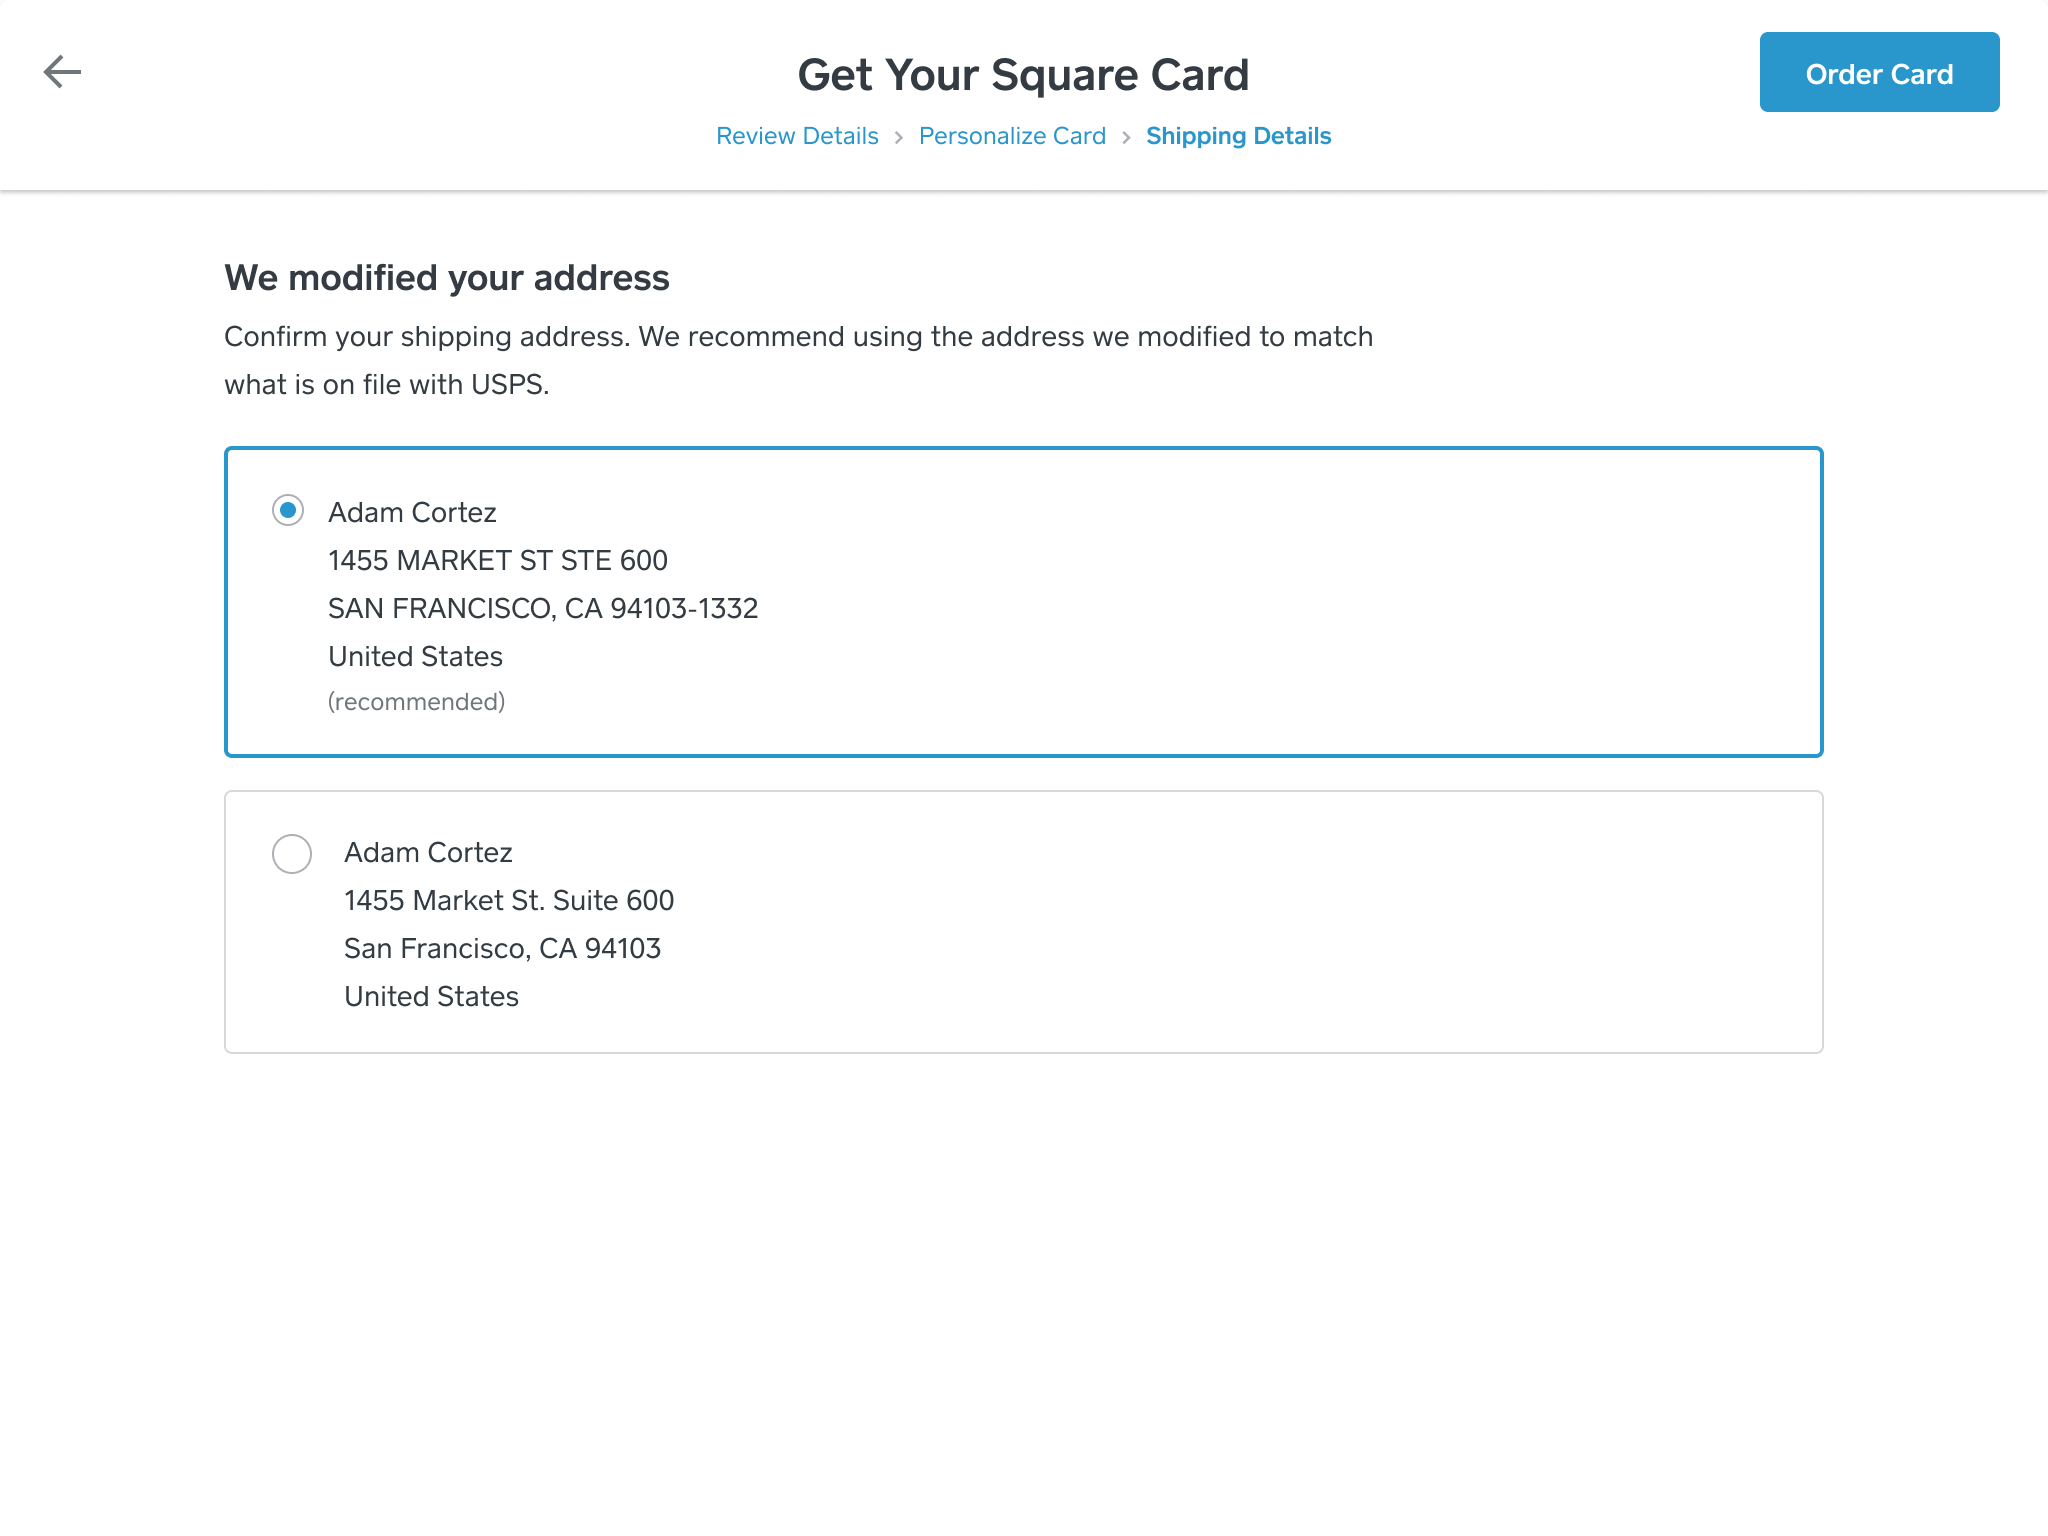 Square Card ordering flow